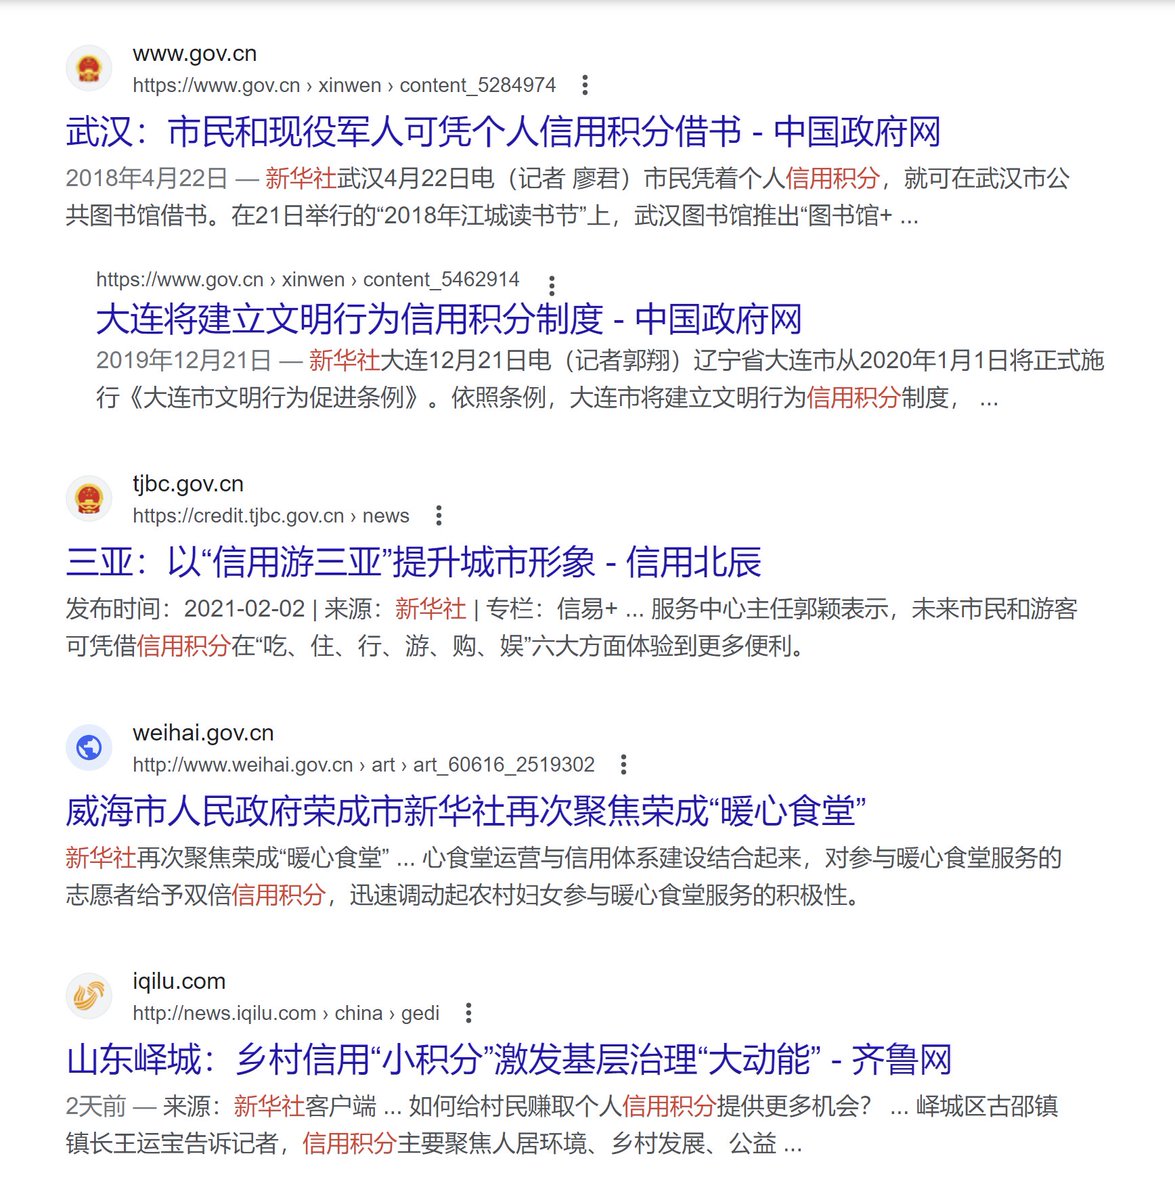 @thinking_panda Reports about social credit score systems (“个人信用积分” in Chinese) on local government websites. One's mother might not be the most reliable source of information.